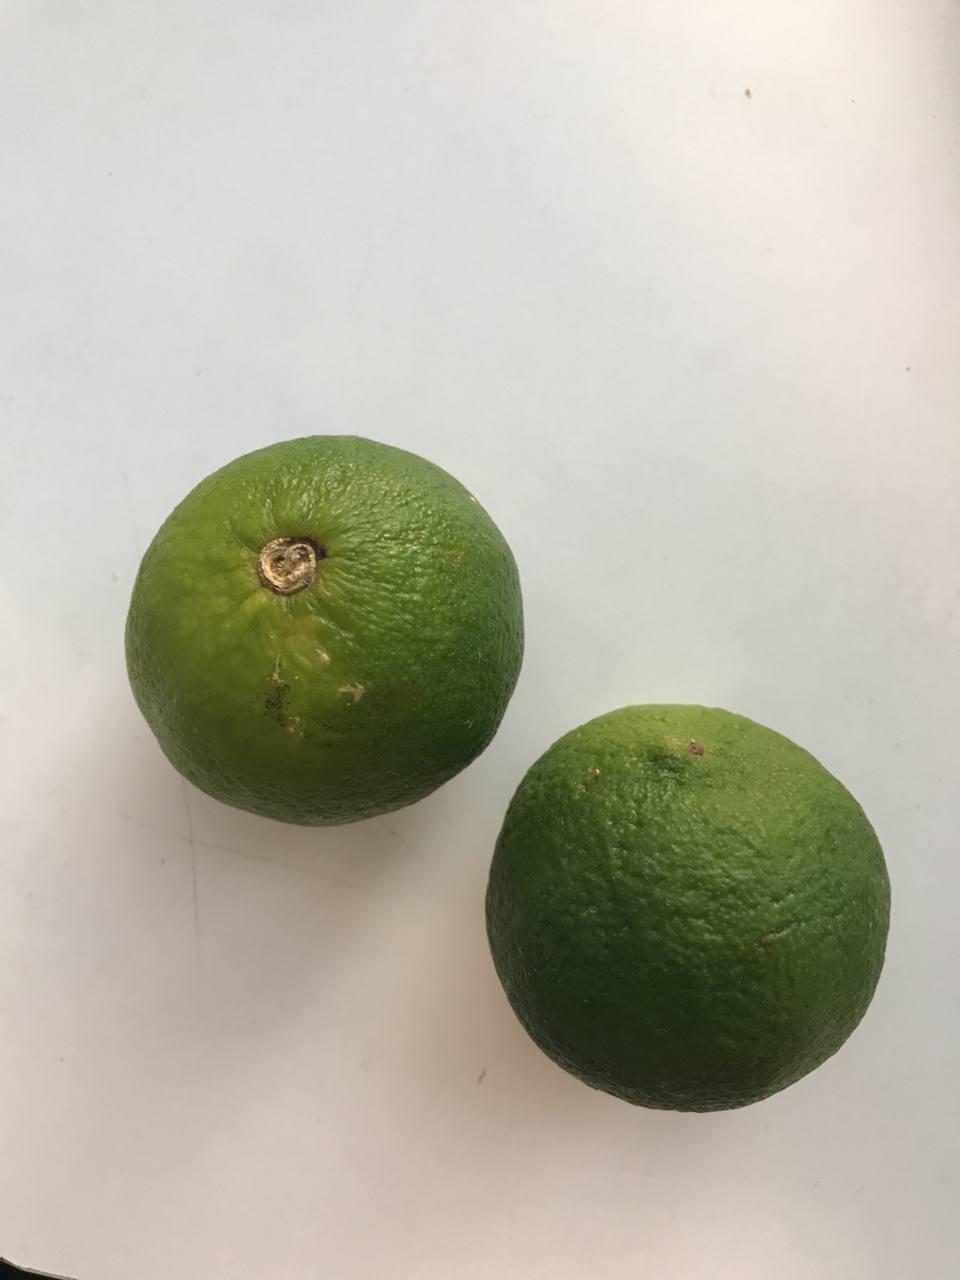 Two limes on a white surface

Description automatically generated